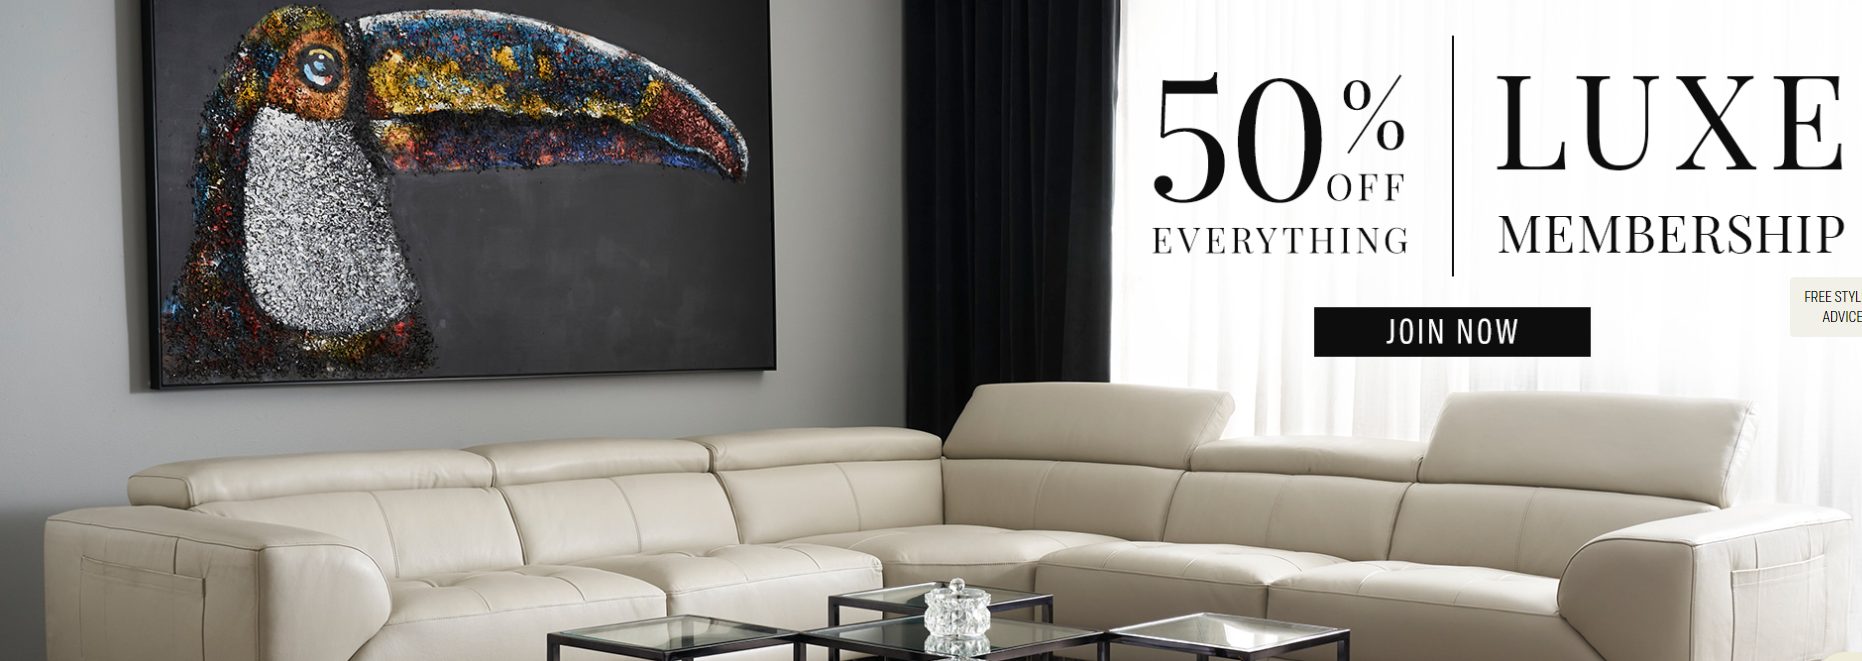 50% OFF everything with Luxe membership at Koala Living